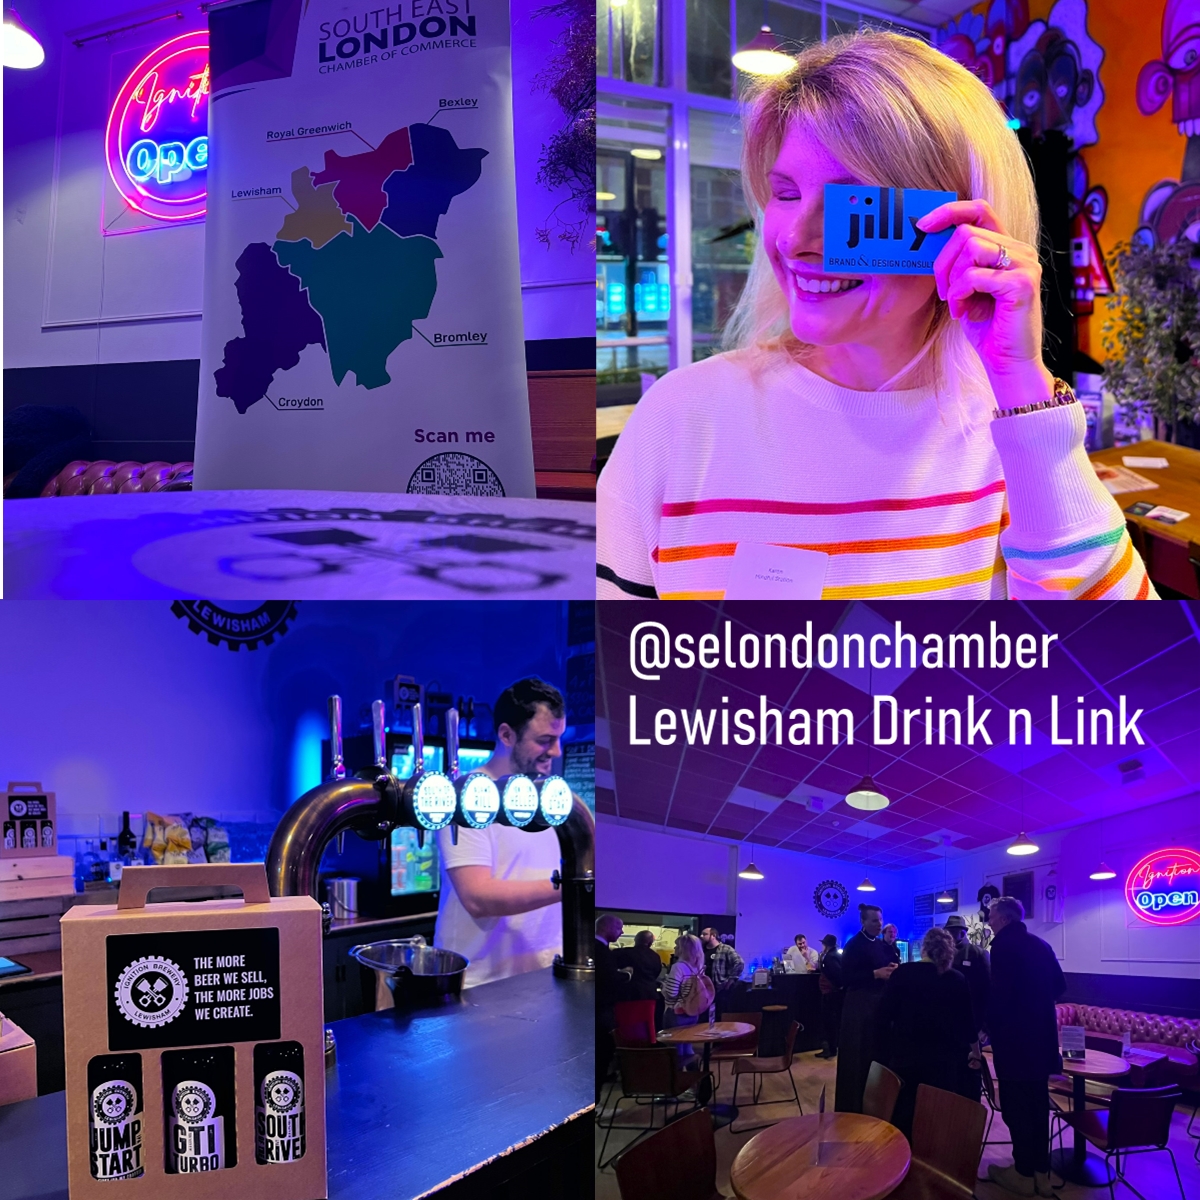 @SELondonChamber Productive evening's networking in a quirky venue - thanks to @SELondonChamber and @IgnitionBrewery for this week's Drink 'N Link event - great mix of familiar and fresh faces #networking #Lewisham #BrightIdeas #branding #SELondon